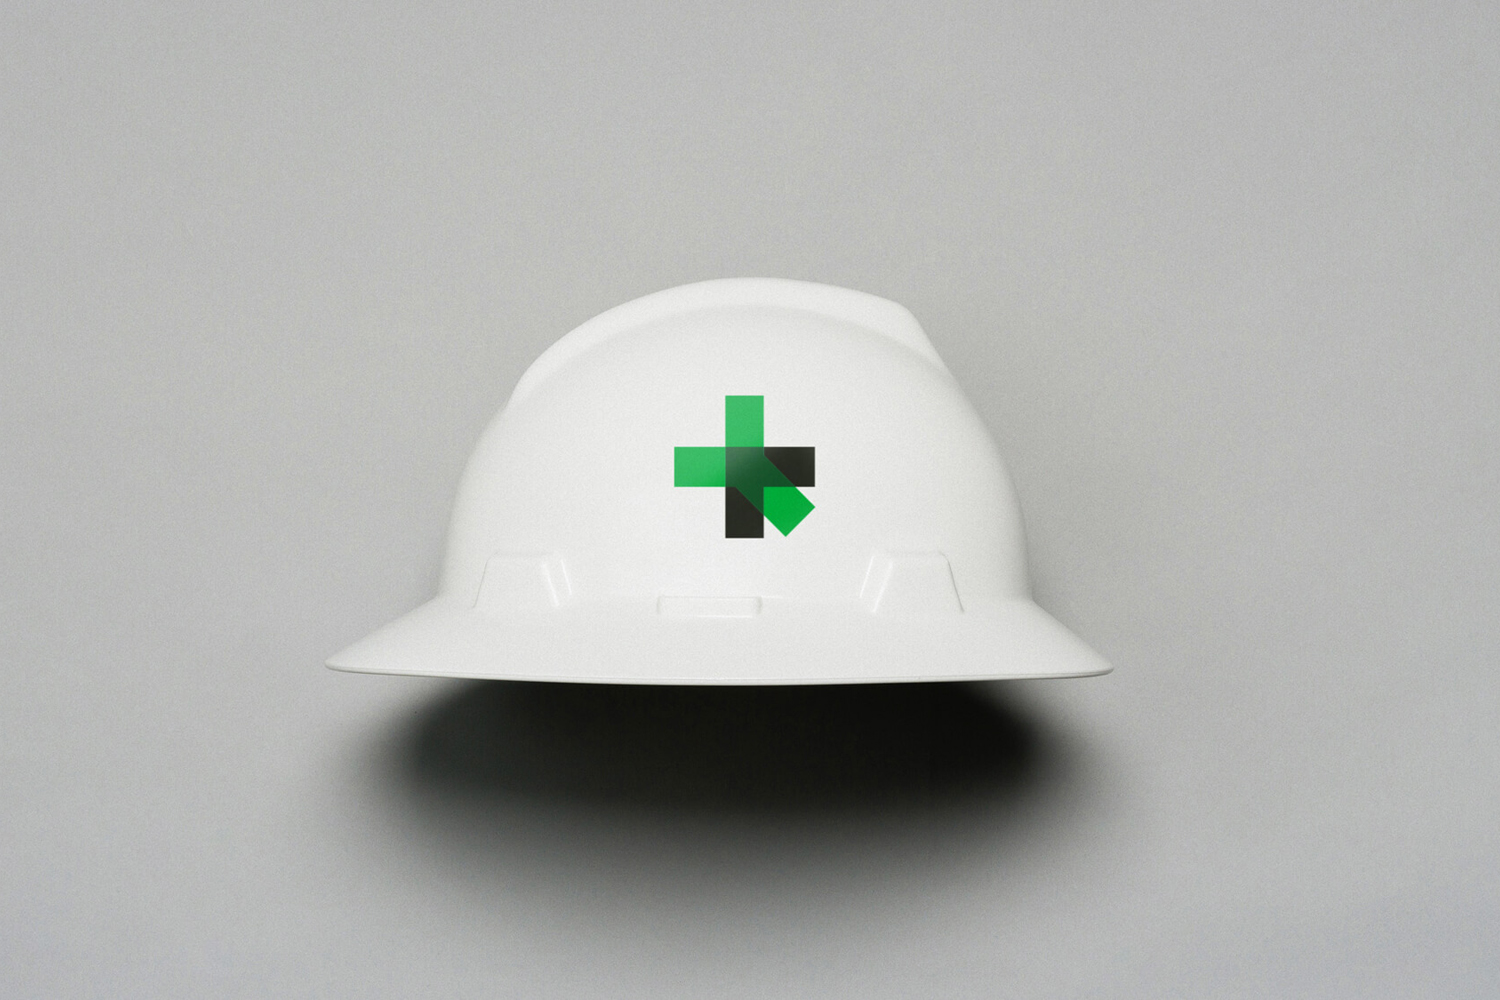 Branded hardhat for Reeves & Young by graphic design studio Matchstic